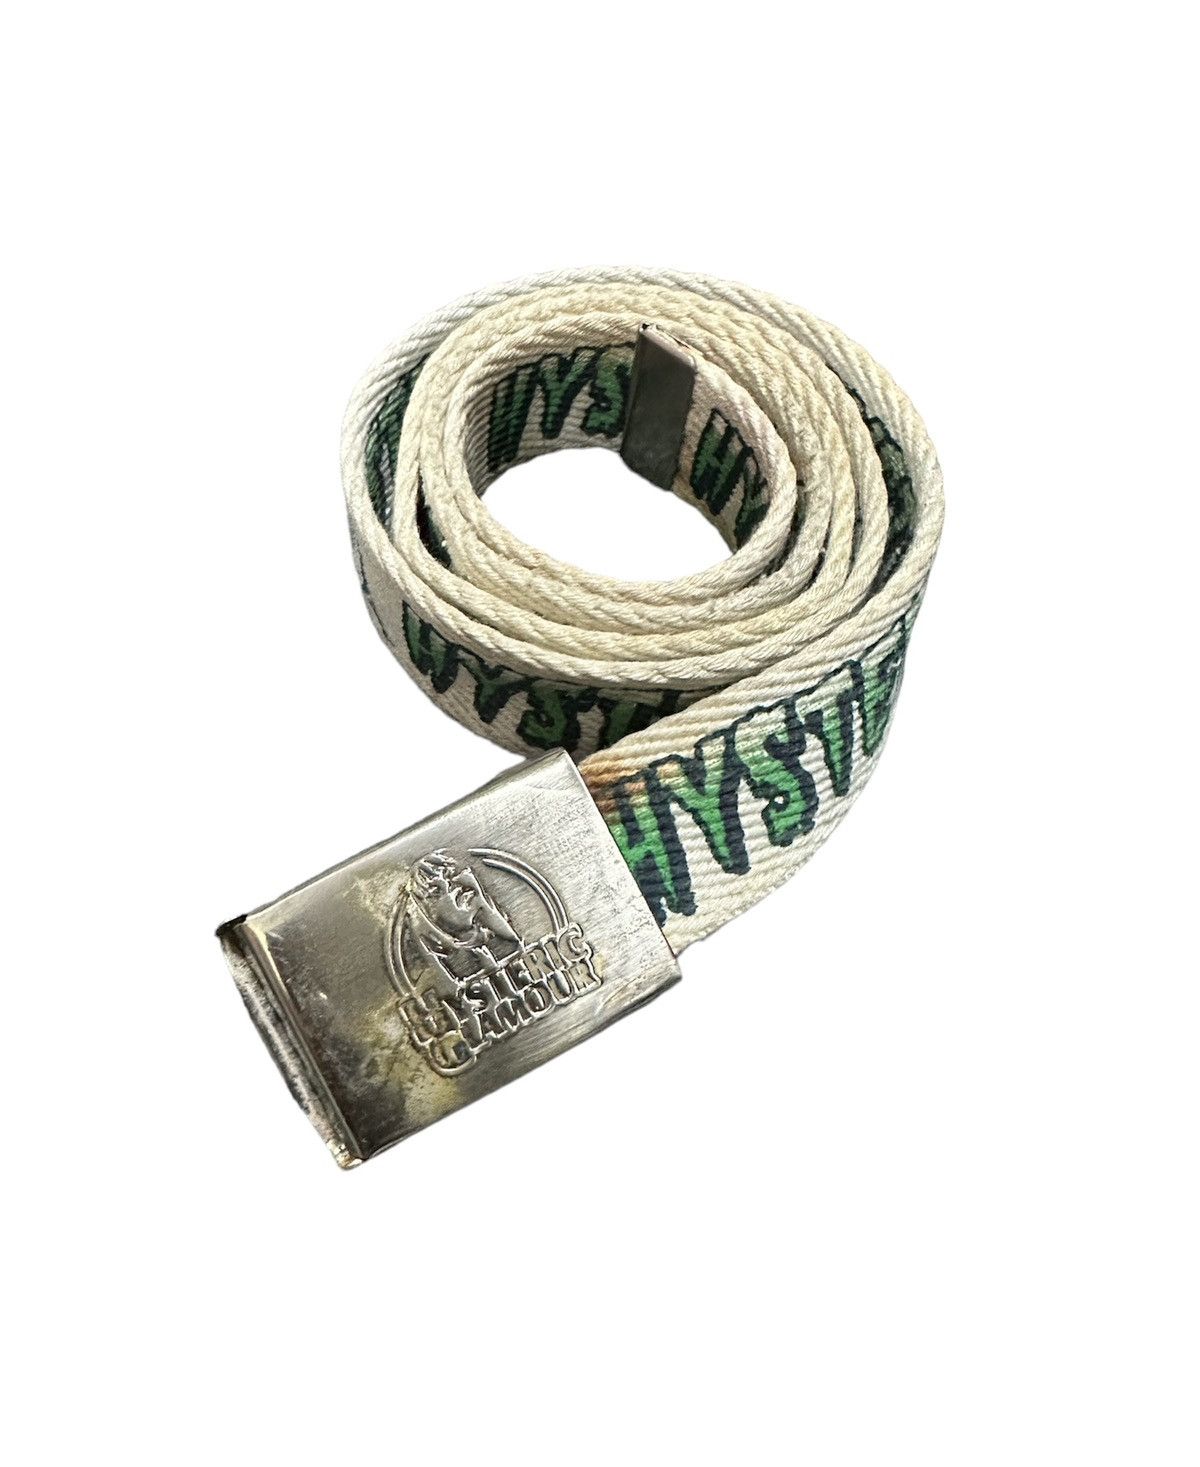 Hysteric Glamour Hysteric glamour belt | Grailed